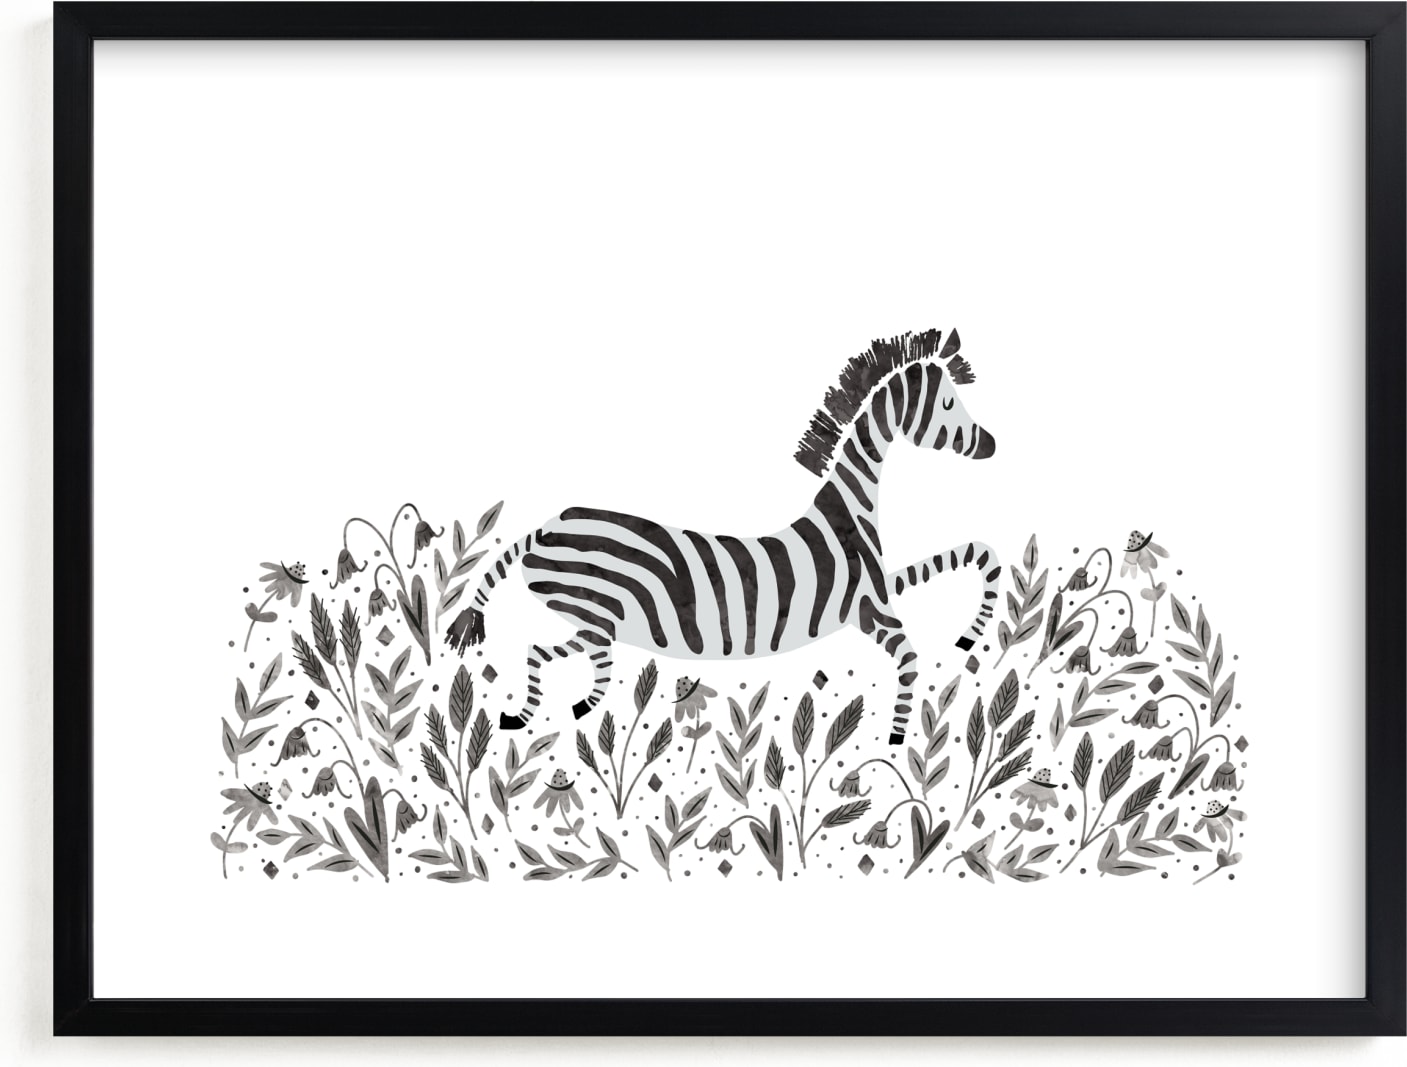 This is a black and white kids wall art by Jackie Crawford called Zebra in the Flowers.